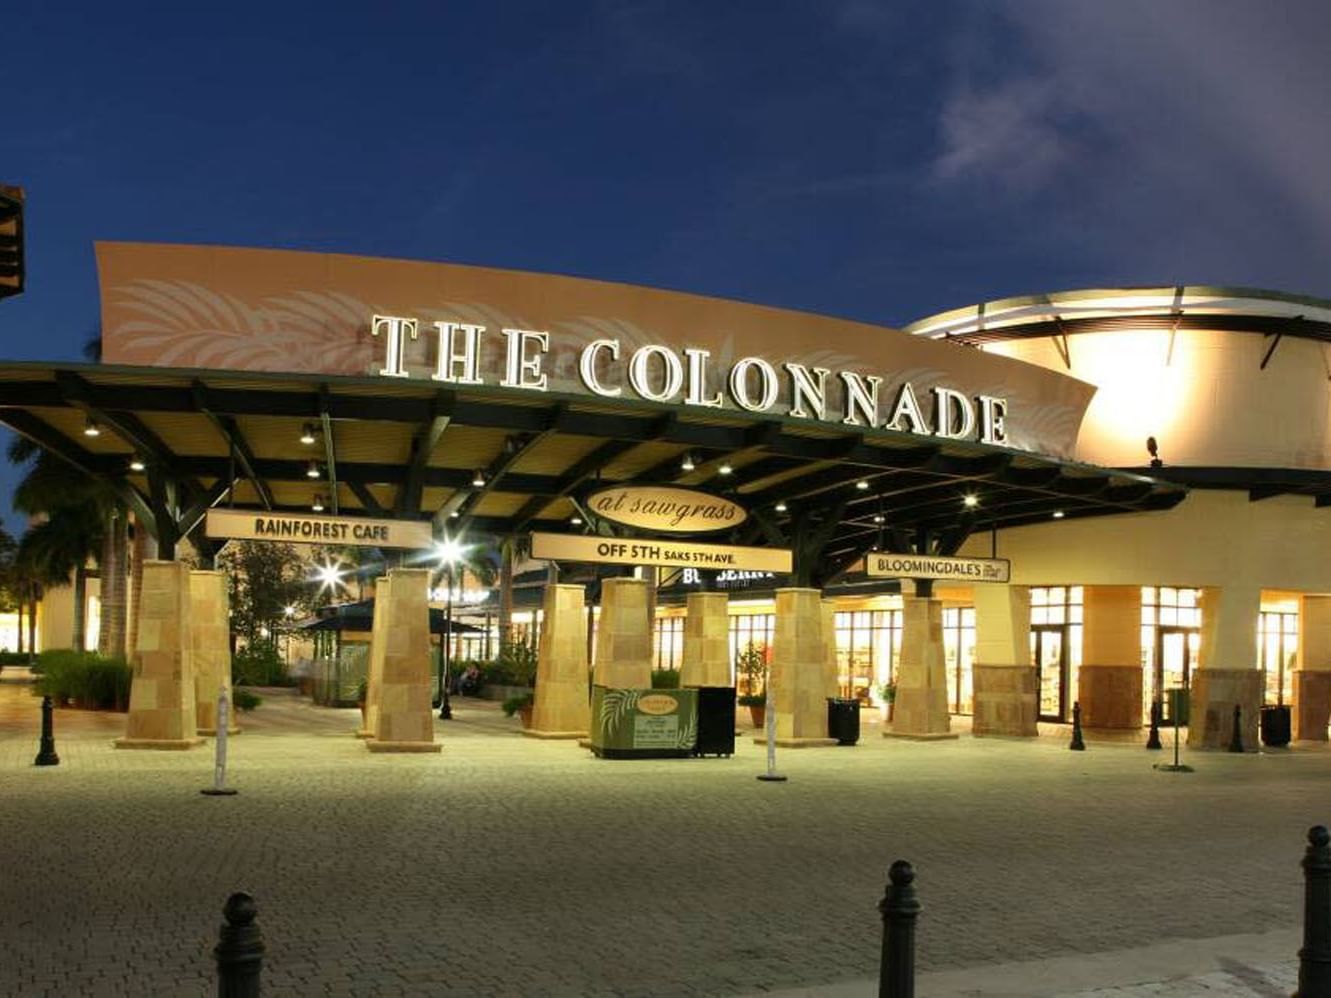 Exterior view of the entrance at night in Sawgrass Mills near Ocean Lodge Boca Raton